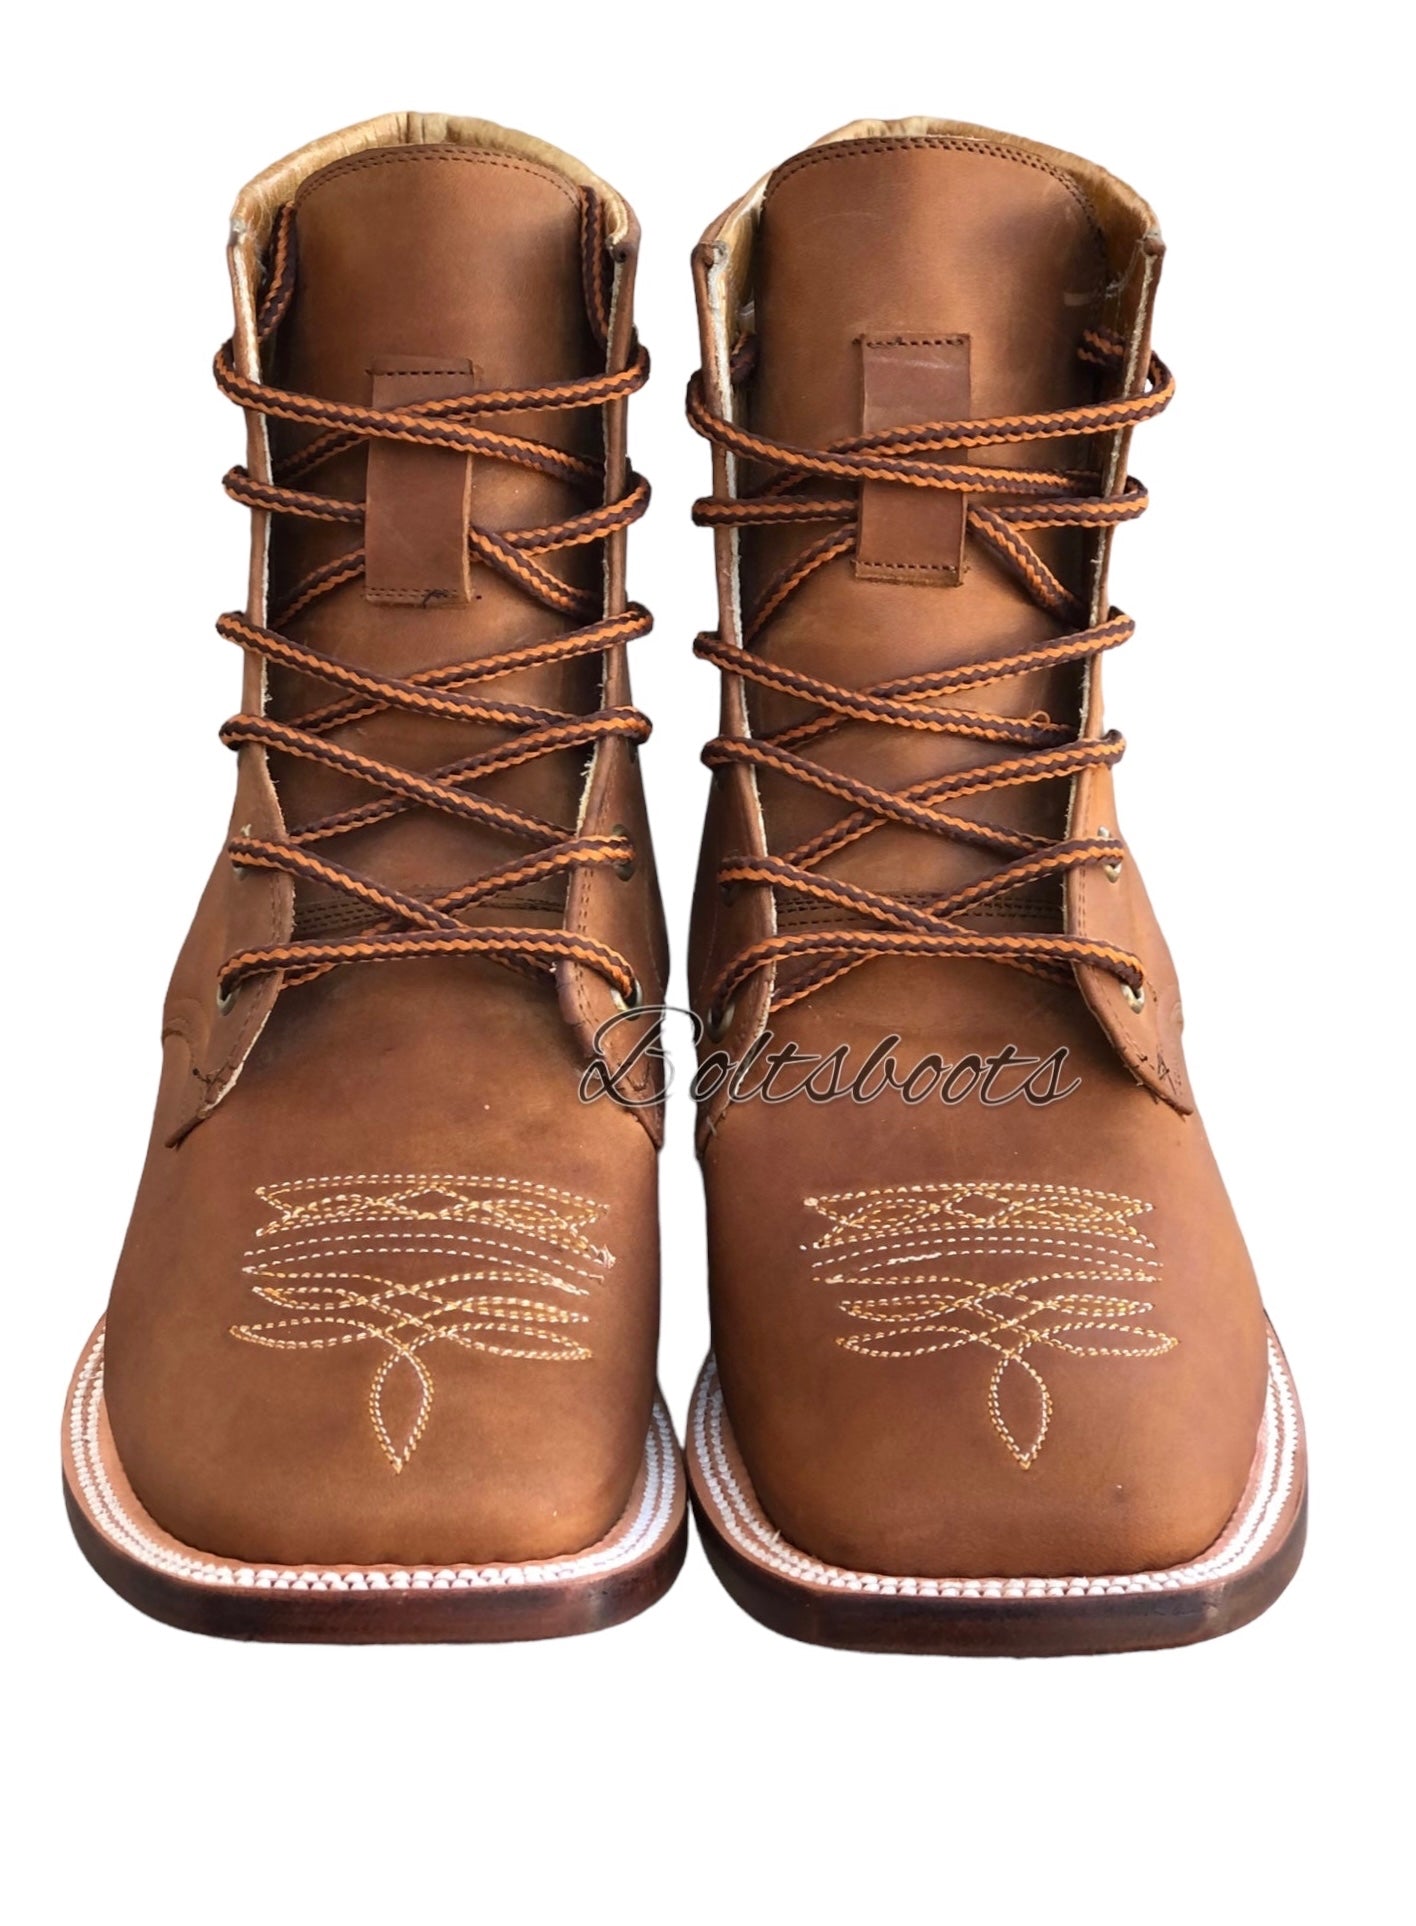 Summer H  womens laced up by Boltsbootsbrand